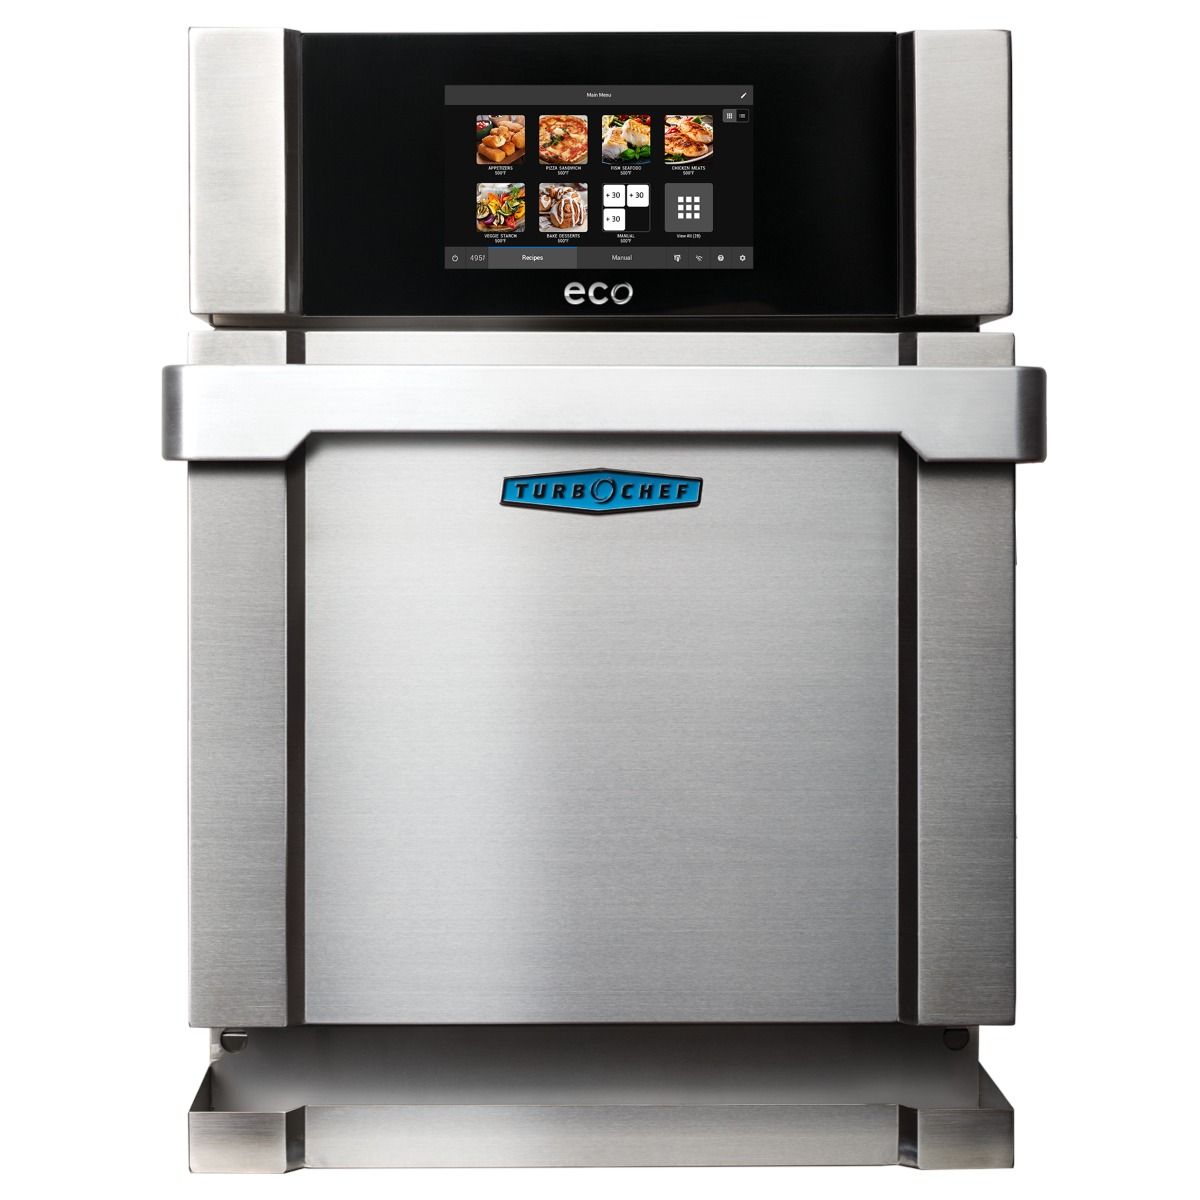 Turbochef Eco Convection/Microwave Rapid Cook Oven